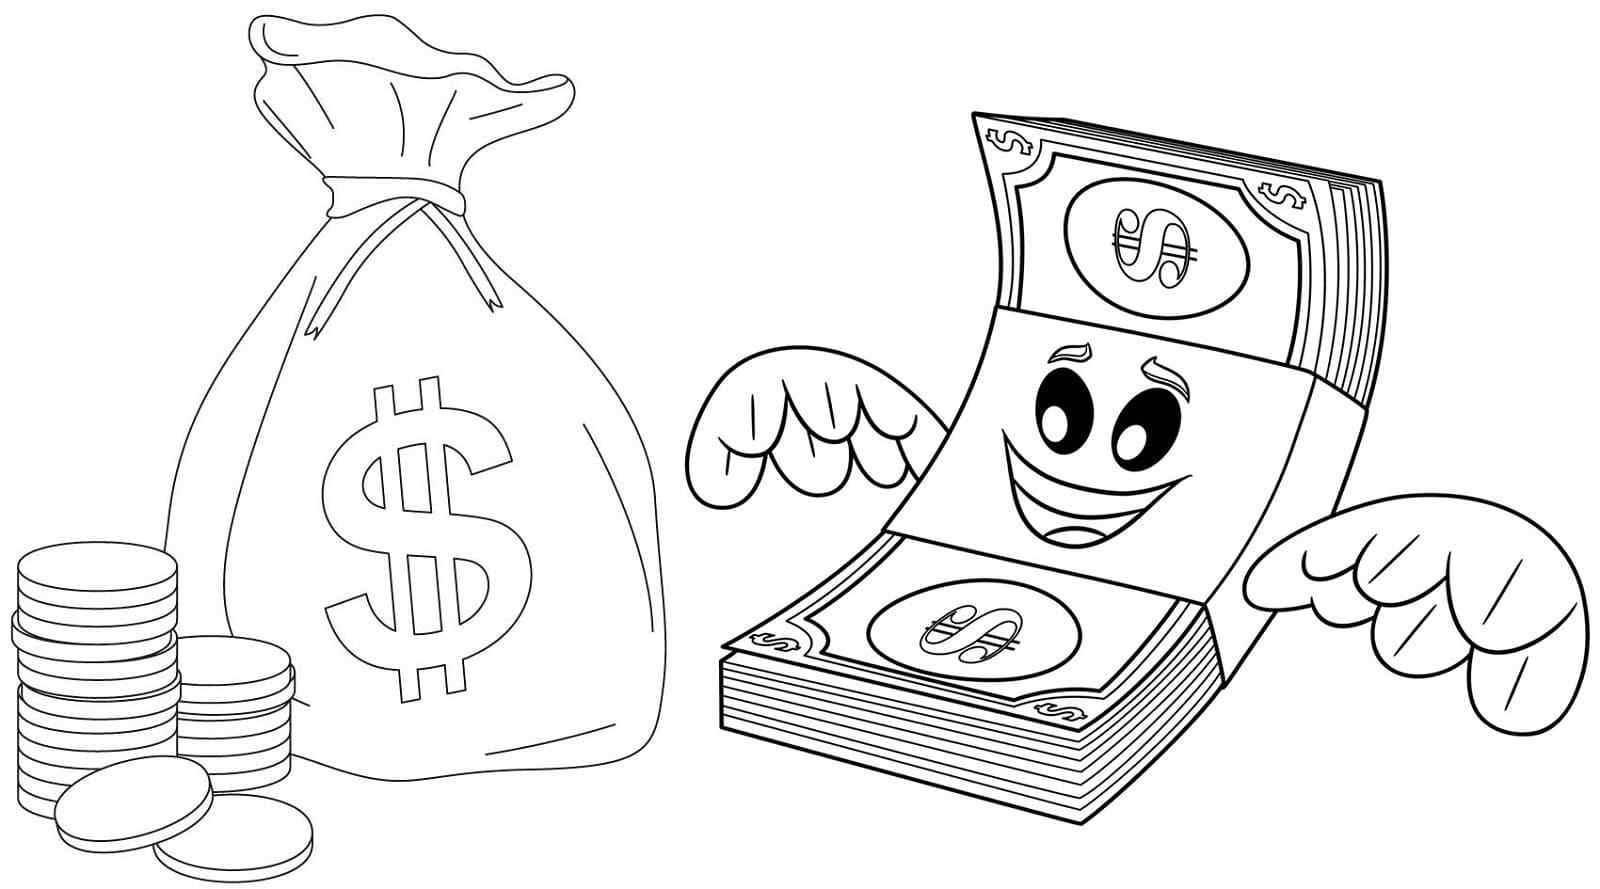 The Winged Wad Of Money Coloring Page